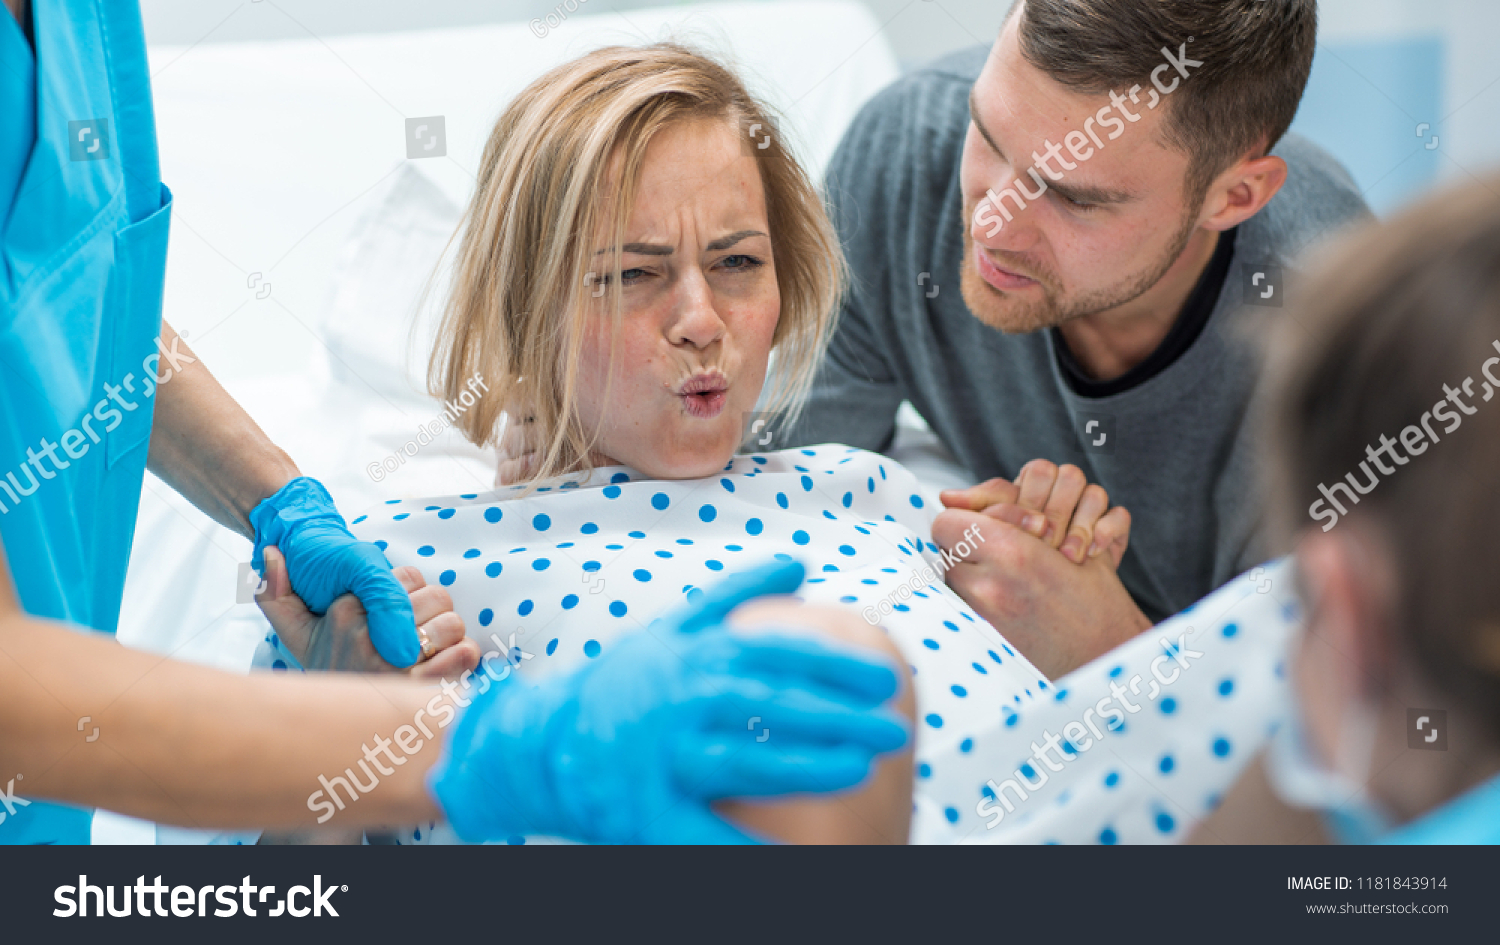 In the Hospital Woman in Labor Pushes to Give Birth, Obstetricians Assisting, Husband Holds Her Hand for Support. Modern Delivery Ward with Professional Midwives. #1181843914